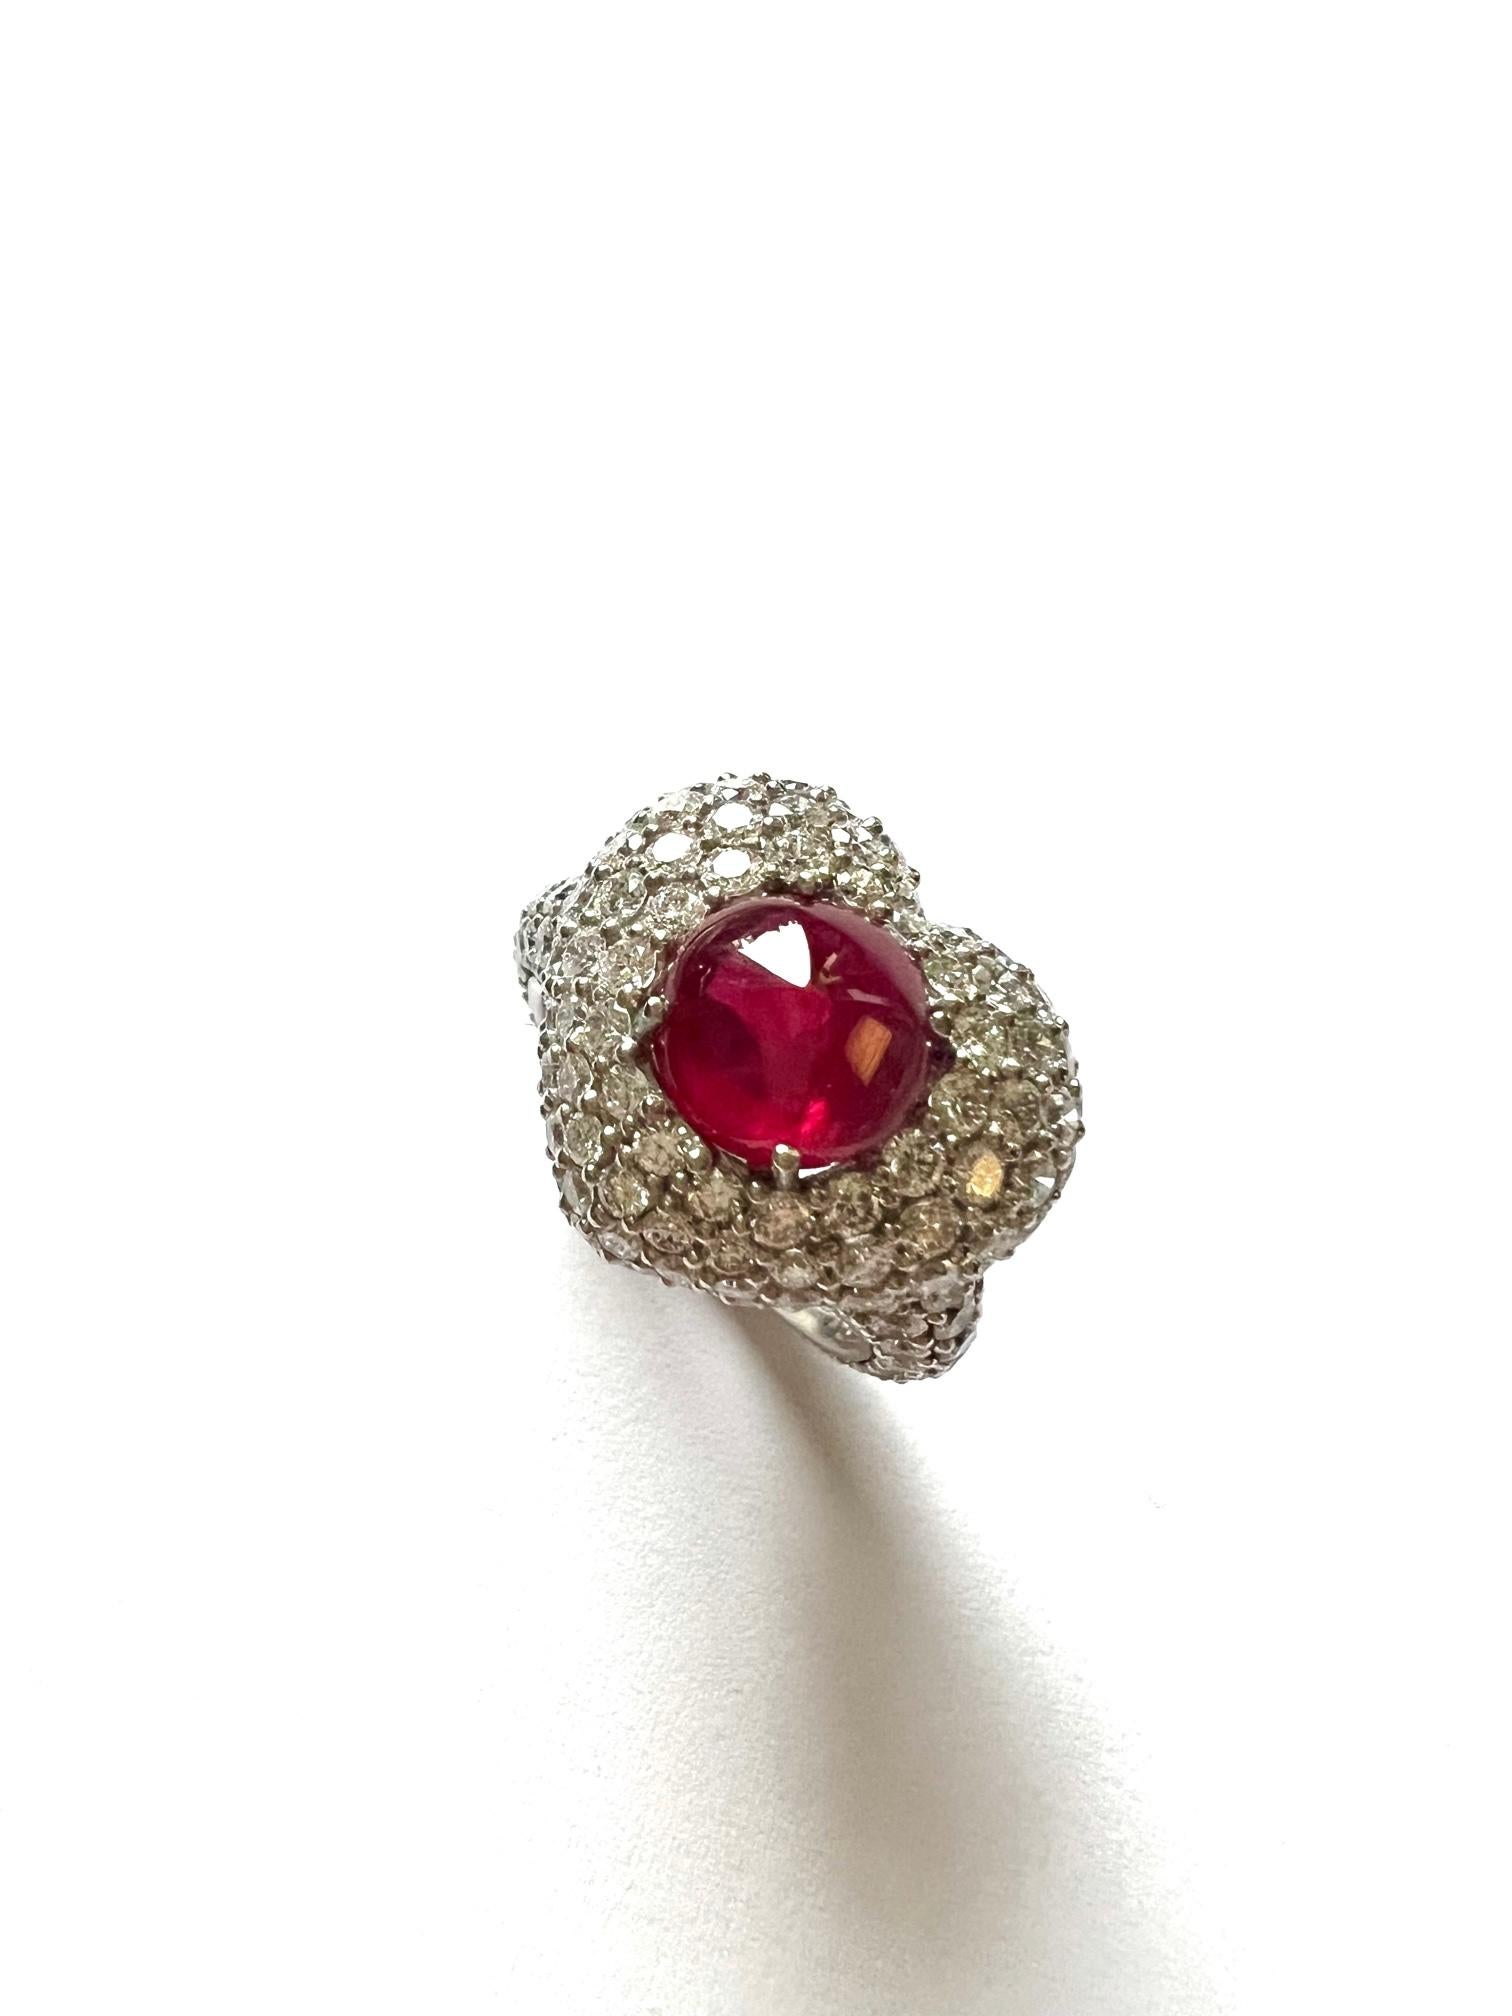 1 Ring in 950/ Platinum (14.45 gram), set with 1x Ruby (Sugarloaf cut, Burma GRS H(b), 3.11 carat) and 179x Diamonds (round, 1.1 - 2.0mm, 4.09 cts). 

Ringsize is 54 (6 3/4) and is resizable.
